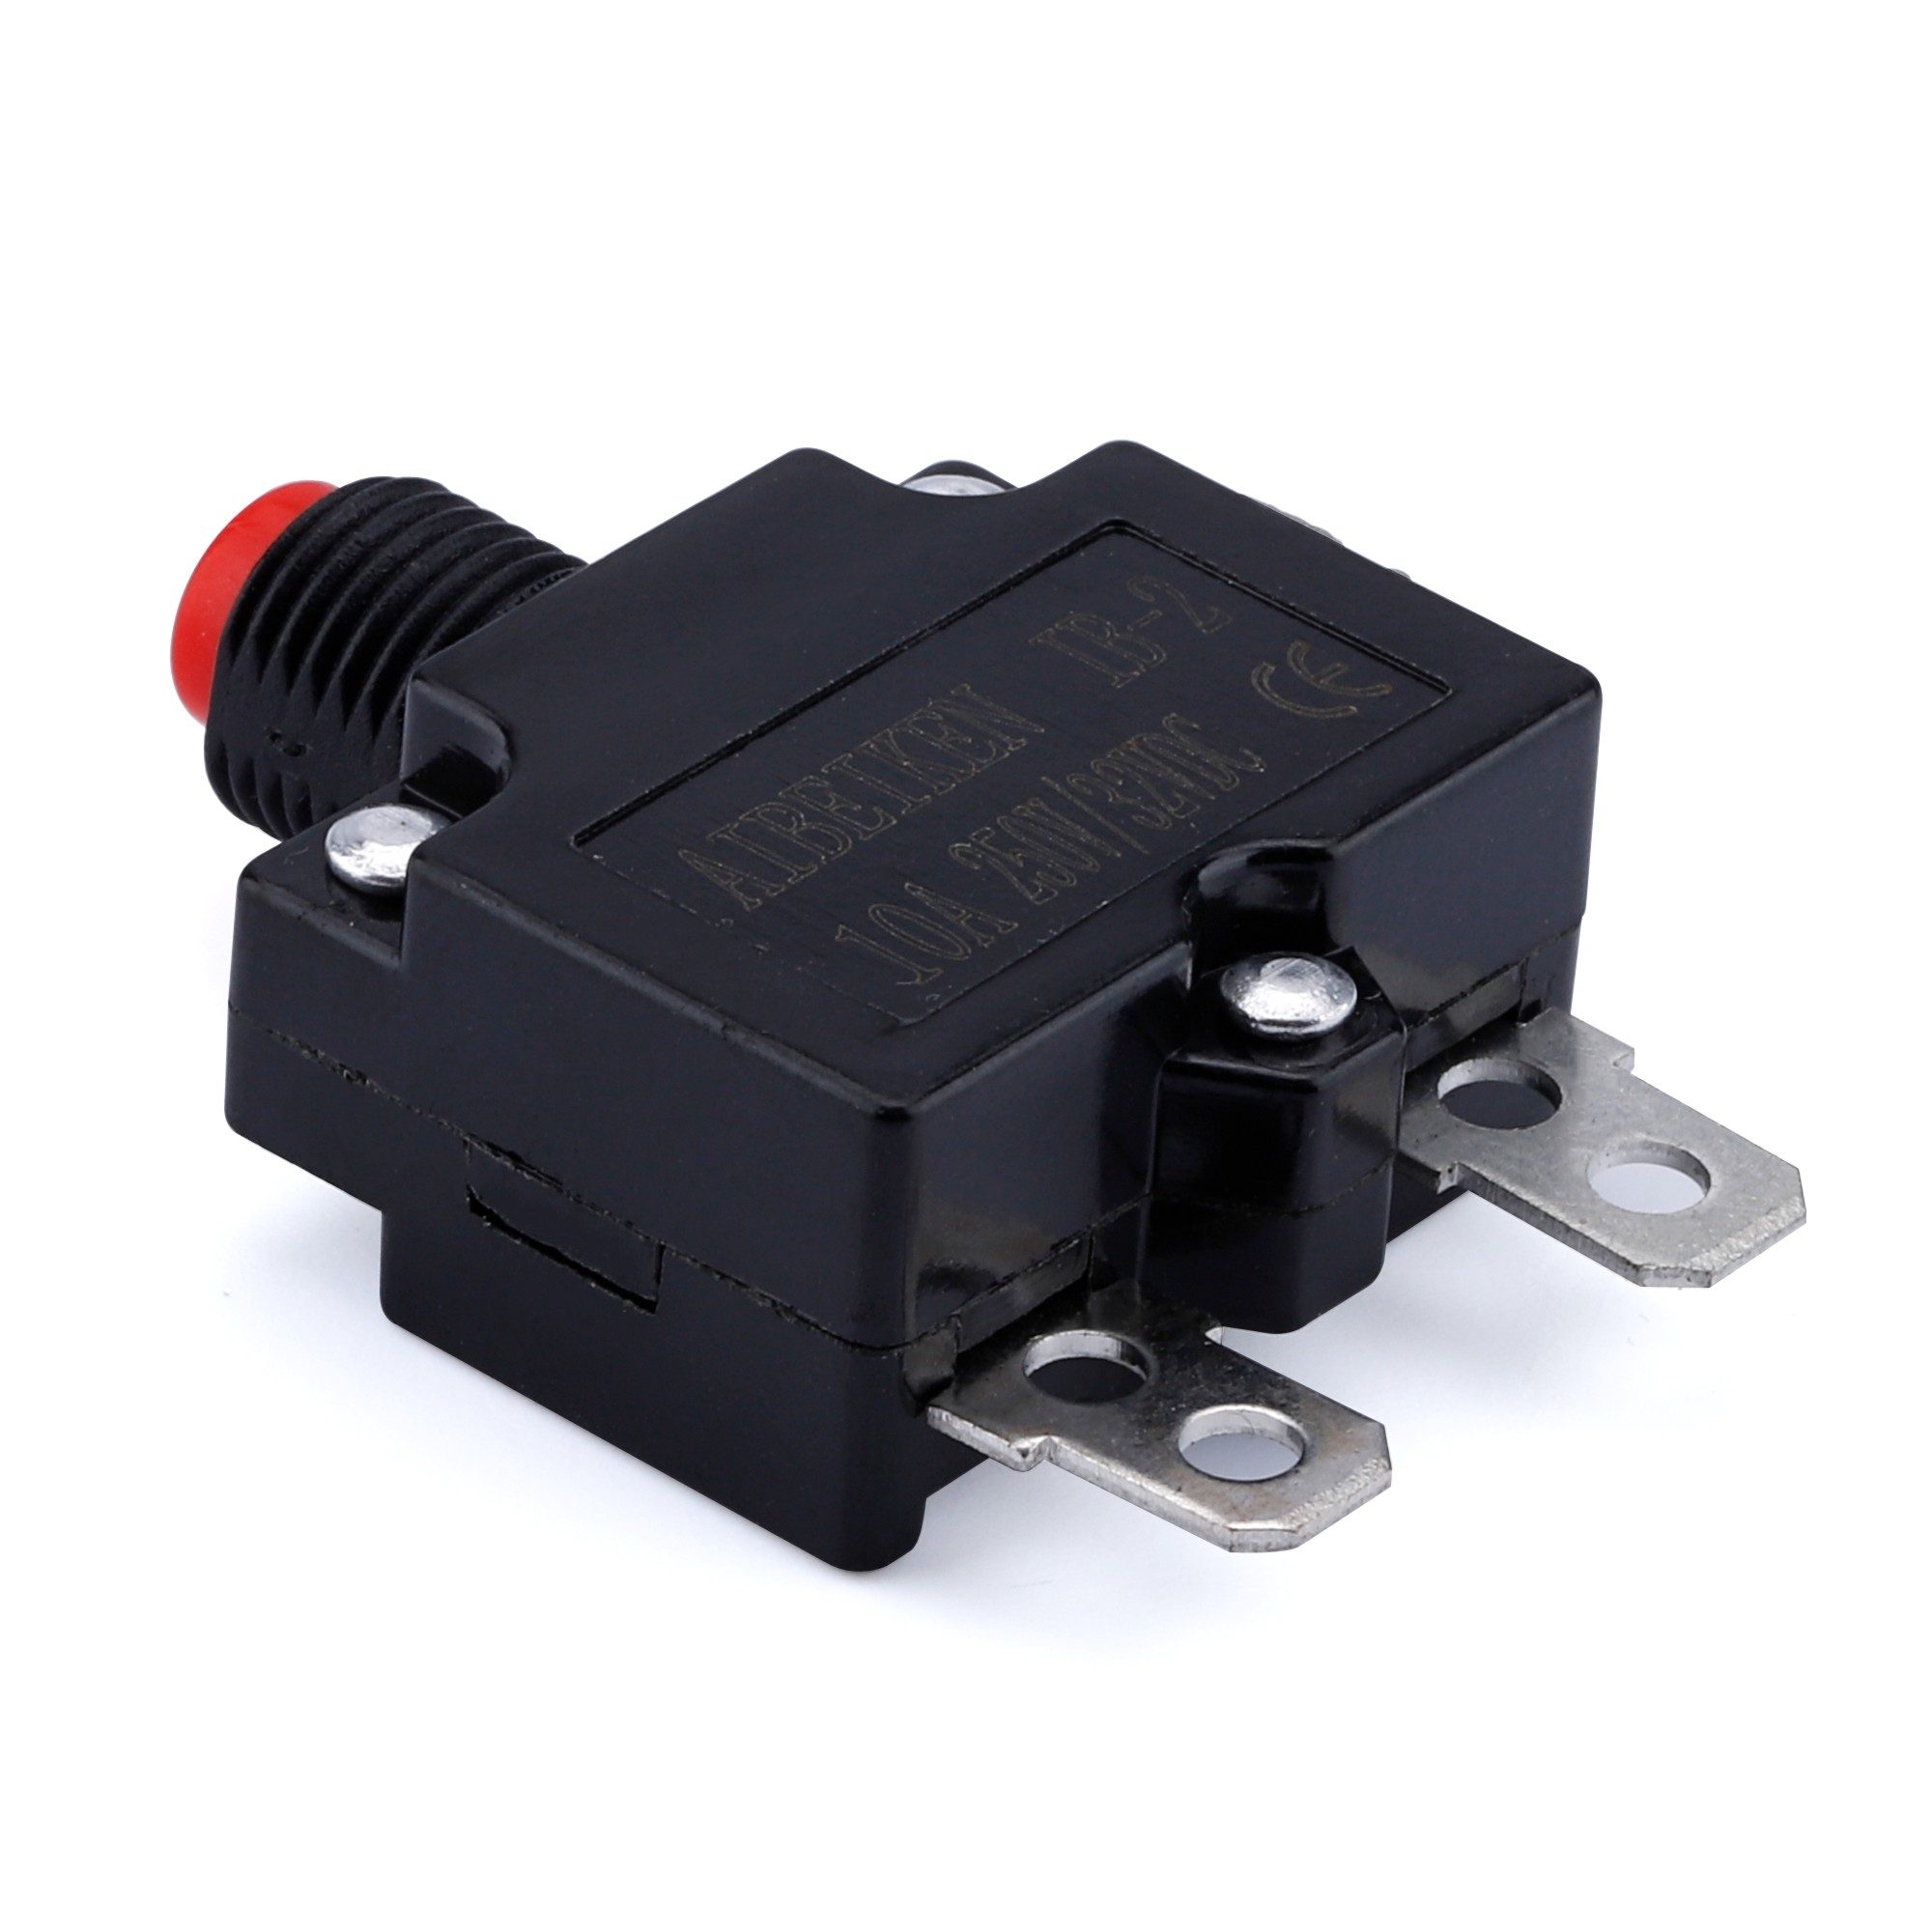 5A 10A 15A 20A 25A 125VAC/250VAC/32DC Electronic Circuit Breaker Resetting Thermal Overload Protector Switch for Refrigerator